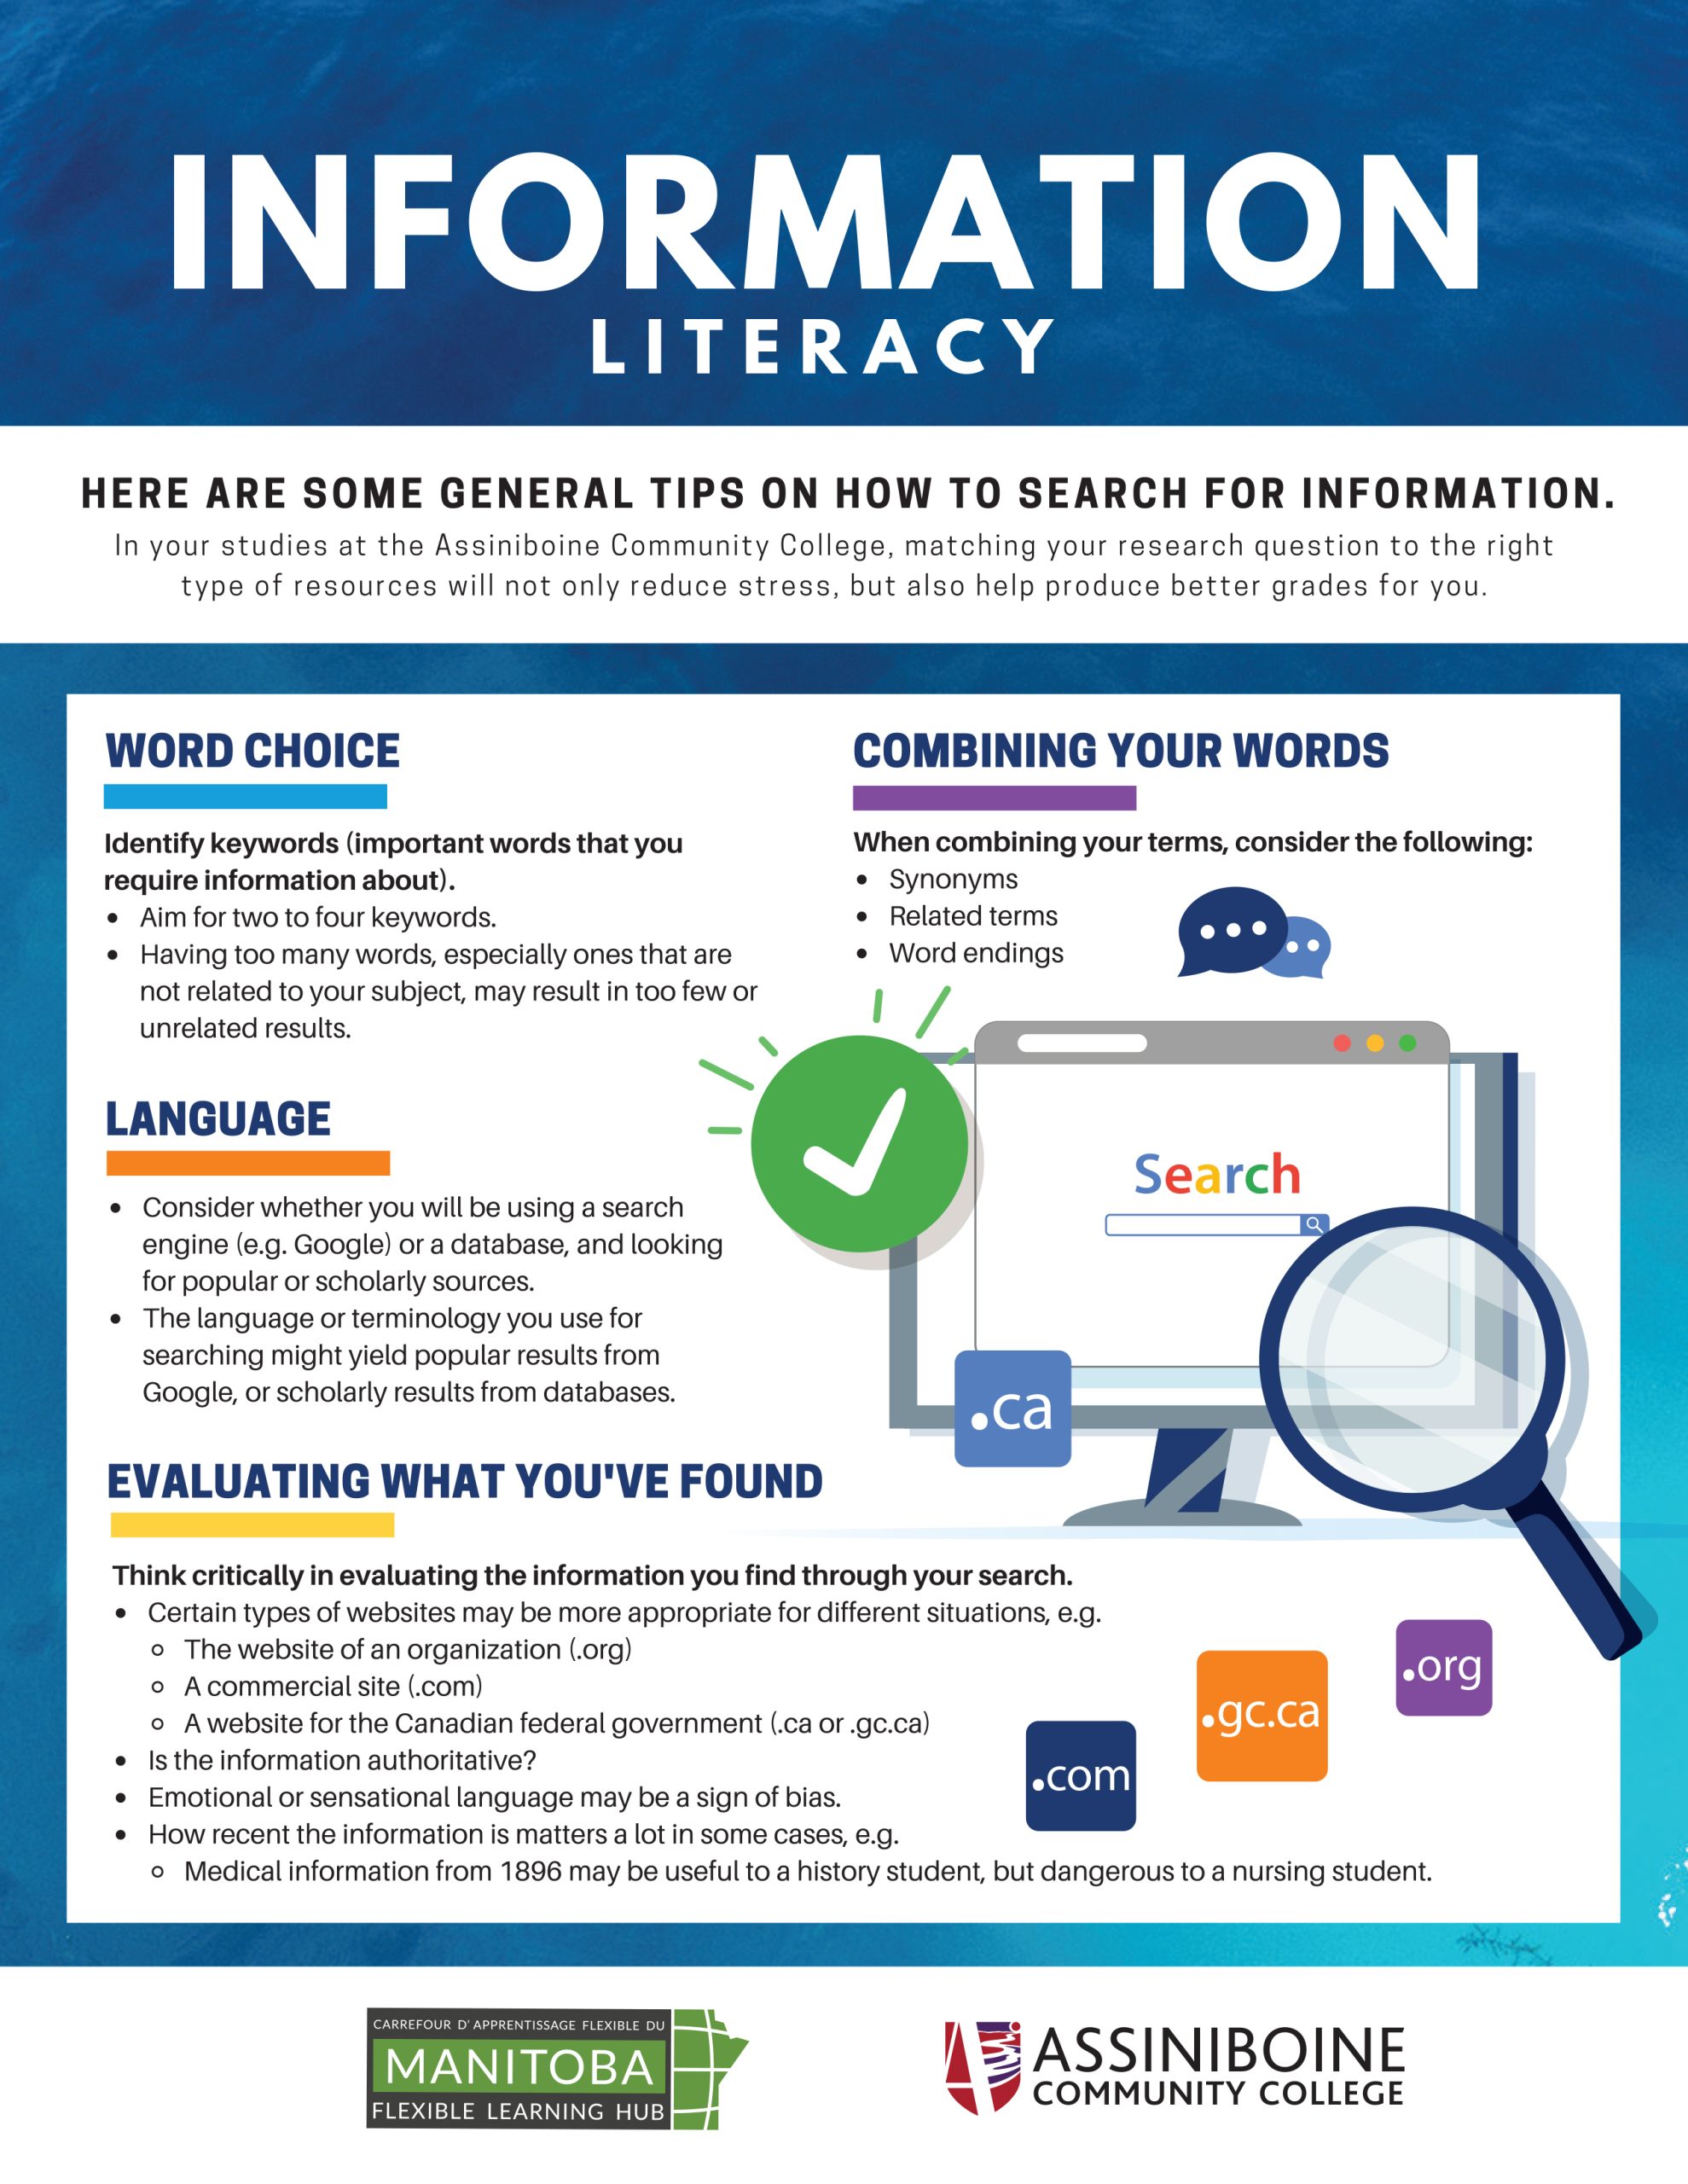 Information Literacy Here are some general tips on how to search for information. In your studies at Assiniboine Community College, matching your research question to the right ytpe of resources will not only reduce stress, but also help to produce better grades for you. Word Choice Word choice Identify keywords (important words that you require information about). aim for two to four keywords. Having too many words, especially ones that are not related to your subject may result in too few or unrelated results. Combining your Words  aim for two to four keywords. Having too many words, especially ones that are not related to your subject may result in too few or unrelated results. Language Consider whether you will be using a search engine or a database and looking for popular or scholarly sources. The language or terminology you use for searching might yield popular results from Google, or scholarly resources from database. Evaluate what you've found Think critically in evaluating the information you find through your search. Certain types of websites may be more appropriate for different situations. The website of an organization (.org) a commercial website (.com) a website from the Canadian federal goverment (.gov.ca) Is the information authoritative? emotional or sensational language may be a sign of bias. How recent the information is matters a lot in some cases, e.g. medical information from 1896 may be useful for a history student, but dangerous to a nursing student